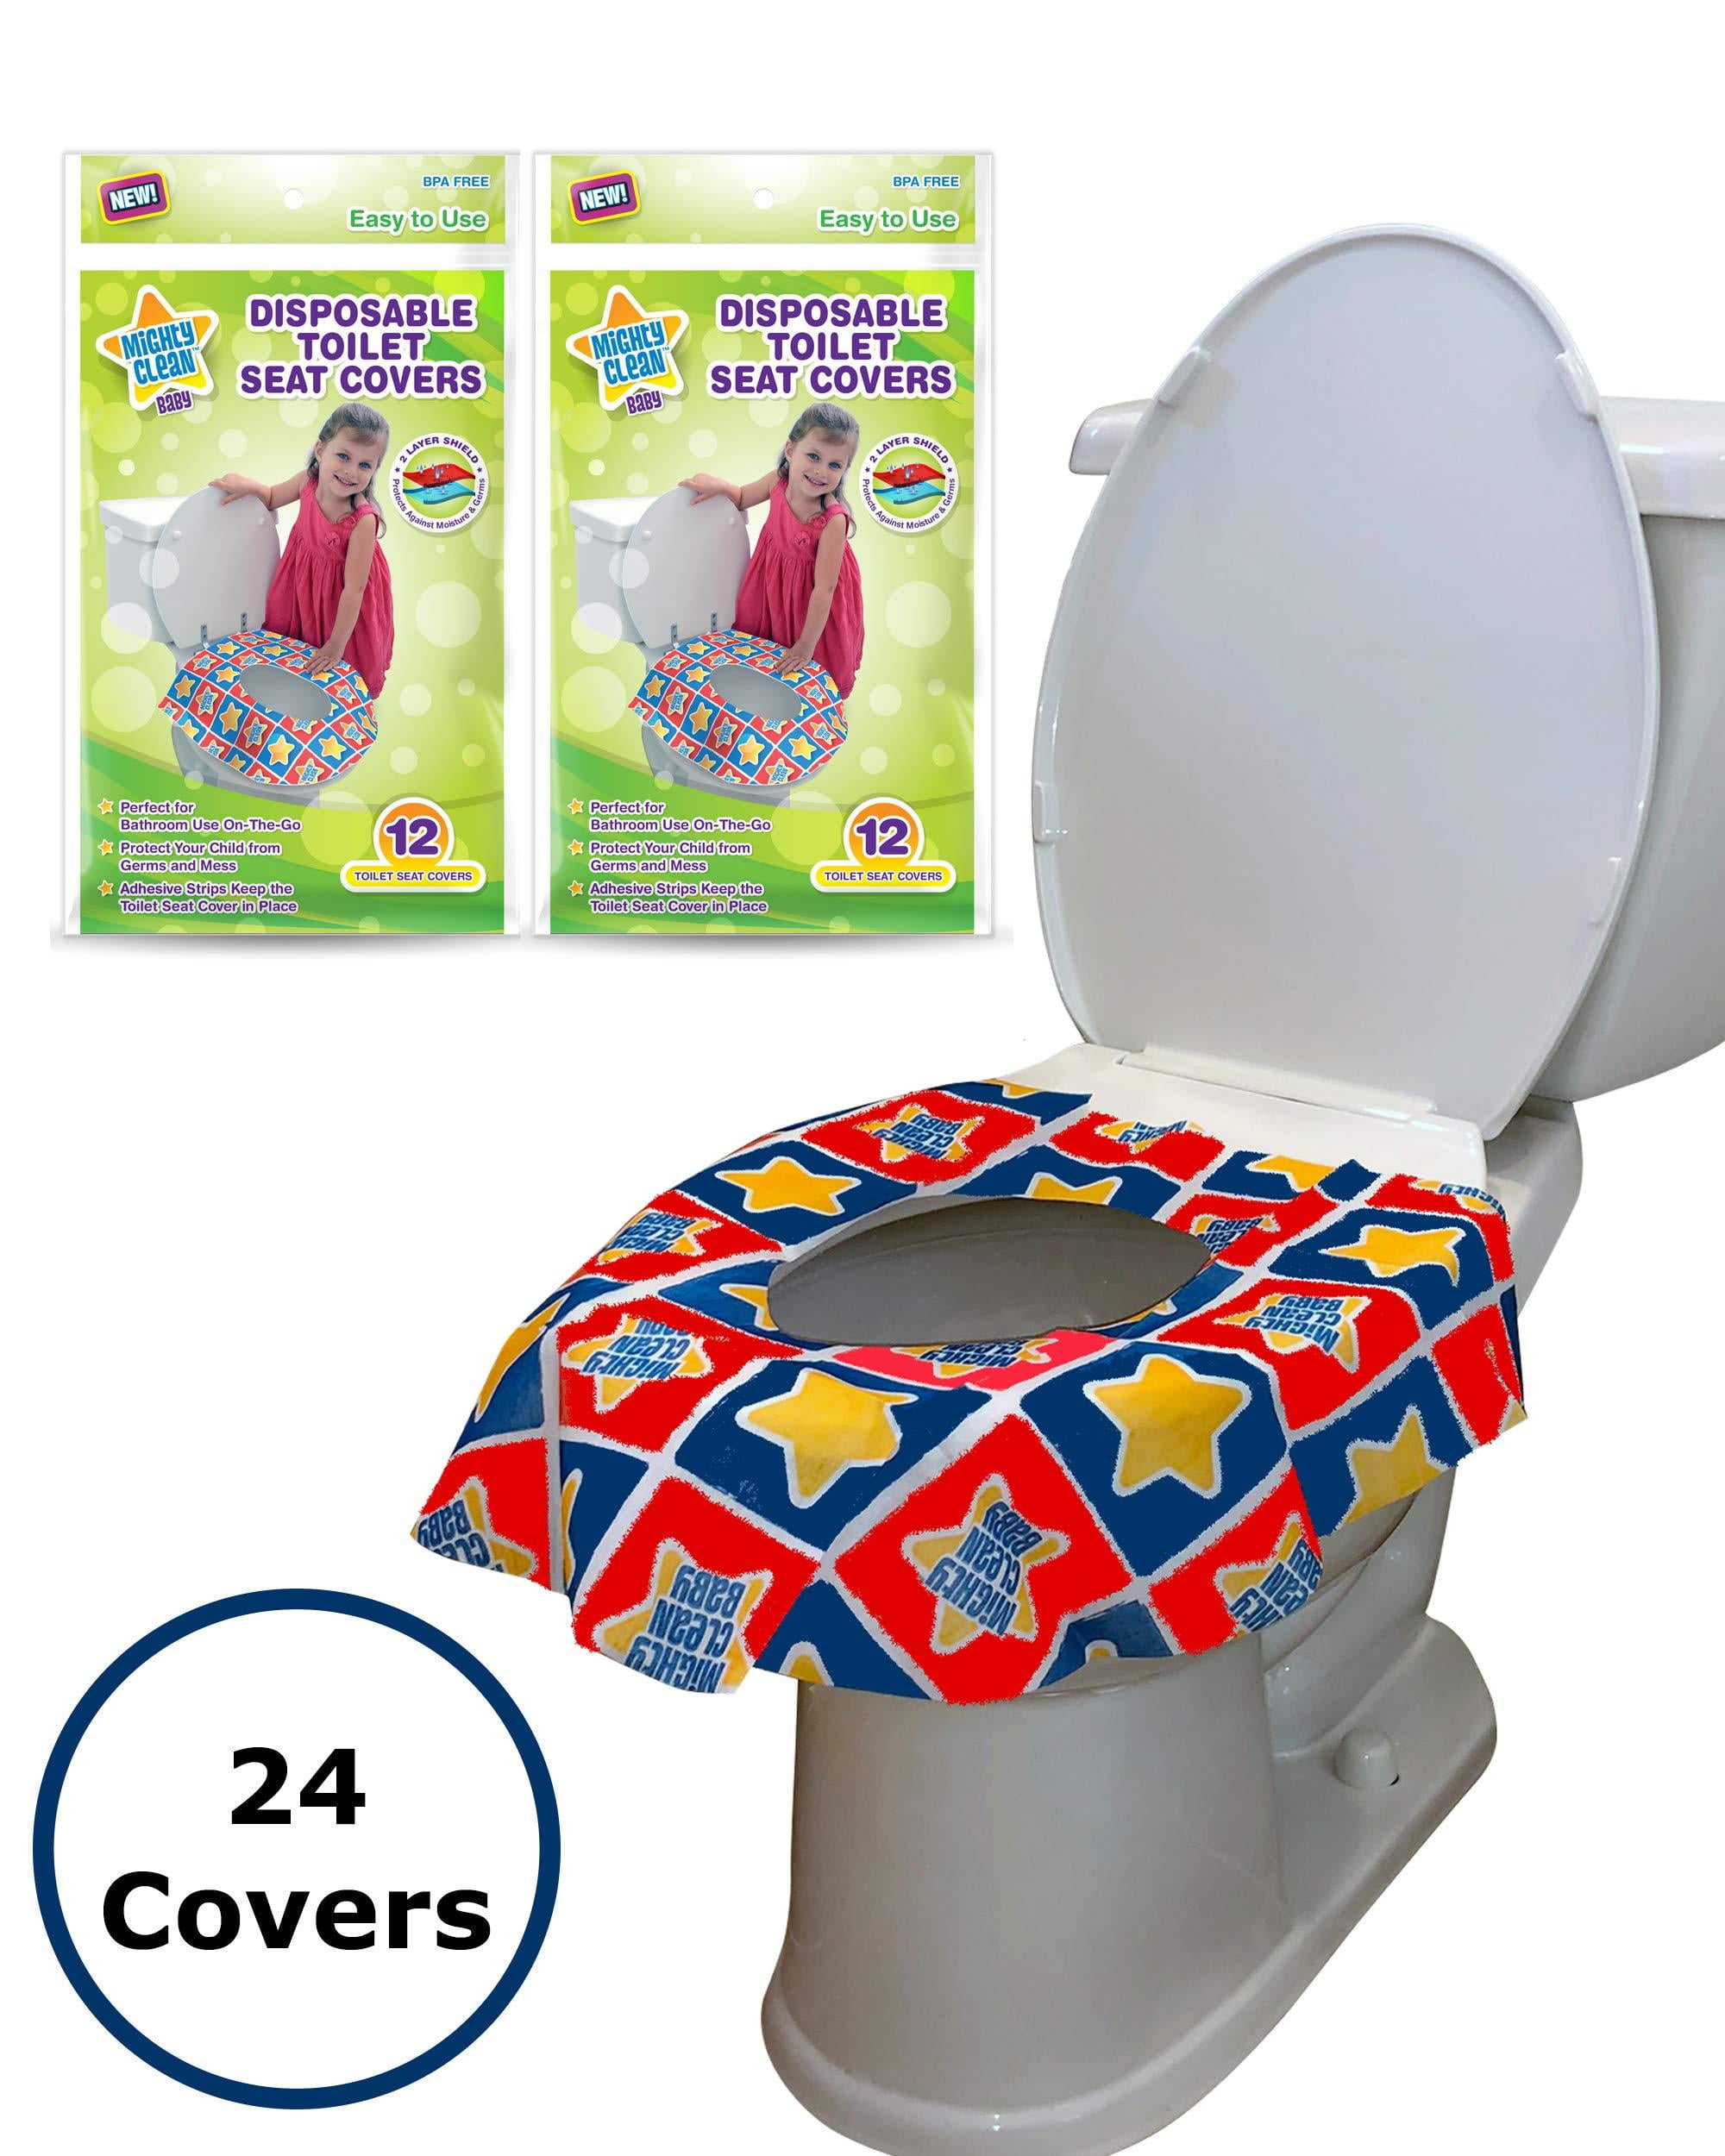 20 Pack Large Size Potty Seat Cover Potty Protectors Disposable Toilet Seat Cover for Kids Potty Training or Public Toilet 